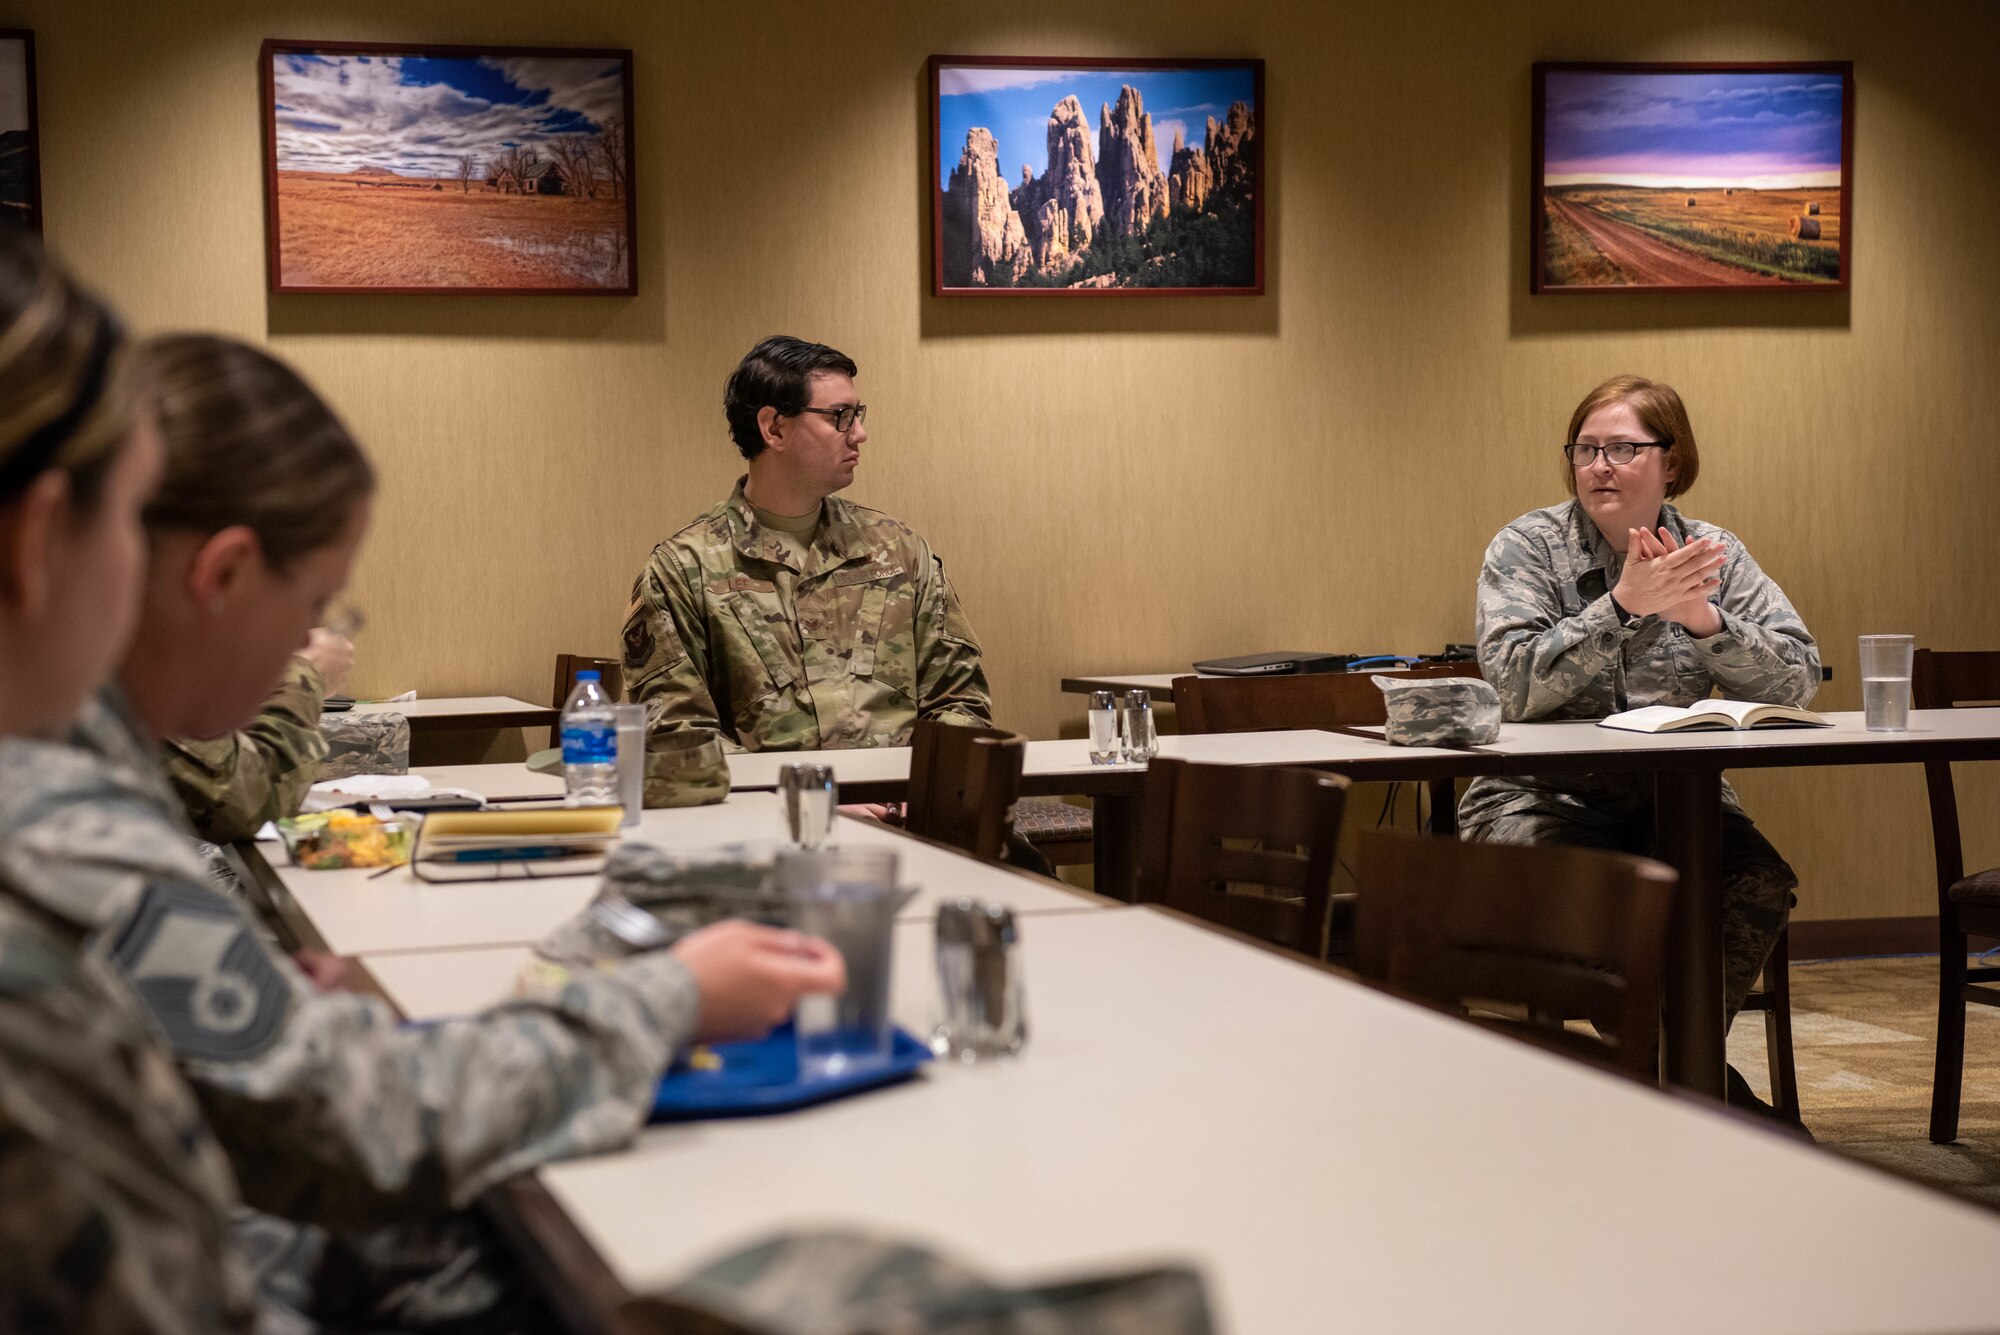 Col. Sarah Deaver, the 28th Mission Support Group commander, speaks to attendees of the inaugural 28th Bomb Wing Women’s Lean In Circle at the Raider Café conference room on Ellsworth Air Force Base, S.D., March 26, 2019. Both men and women serving on Ellsworth AFB were invited to attend to discuss and break down barriers to success and happiness that are based on gender. (U.S. Air Force photo by Tech. Sgt. Jette Carr)